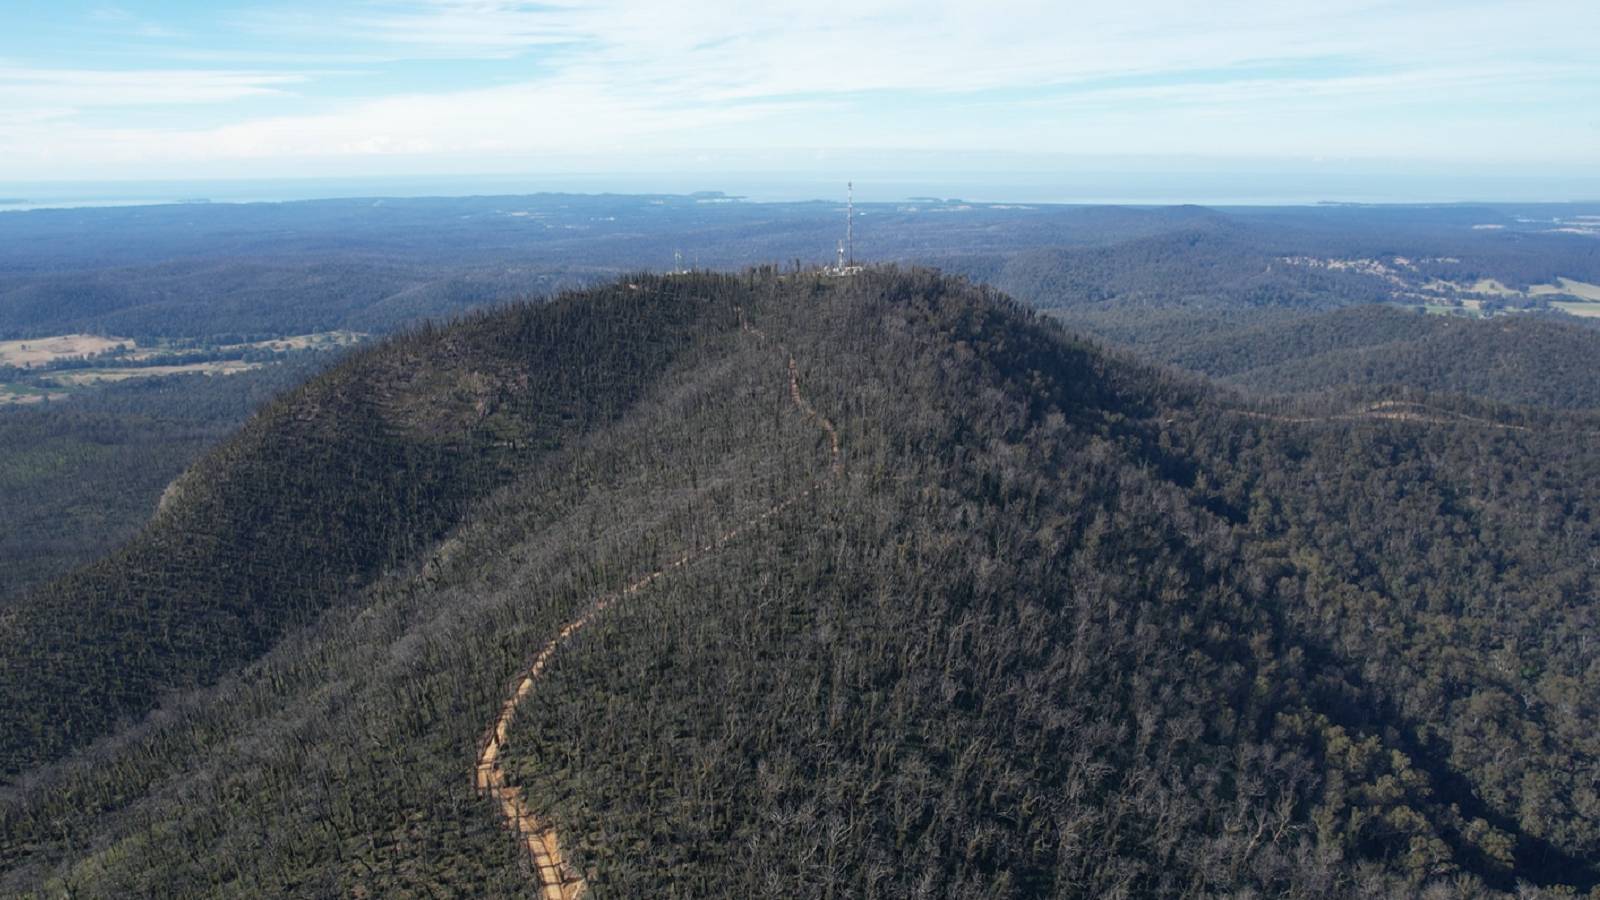 A dirt track leads to a telecommunications tower on top of a mountain covered in burnt forest